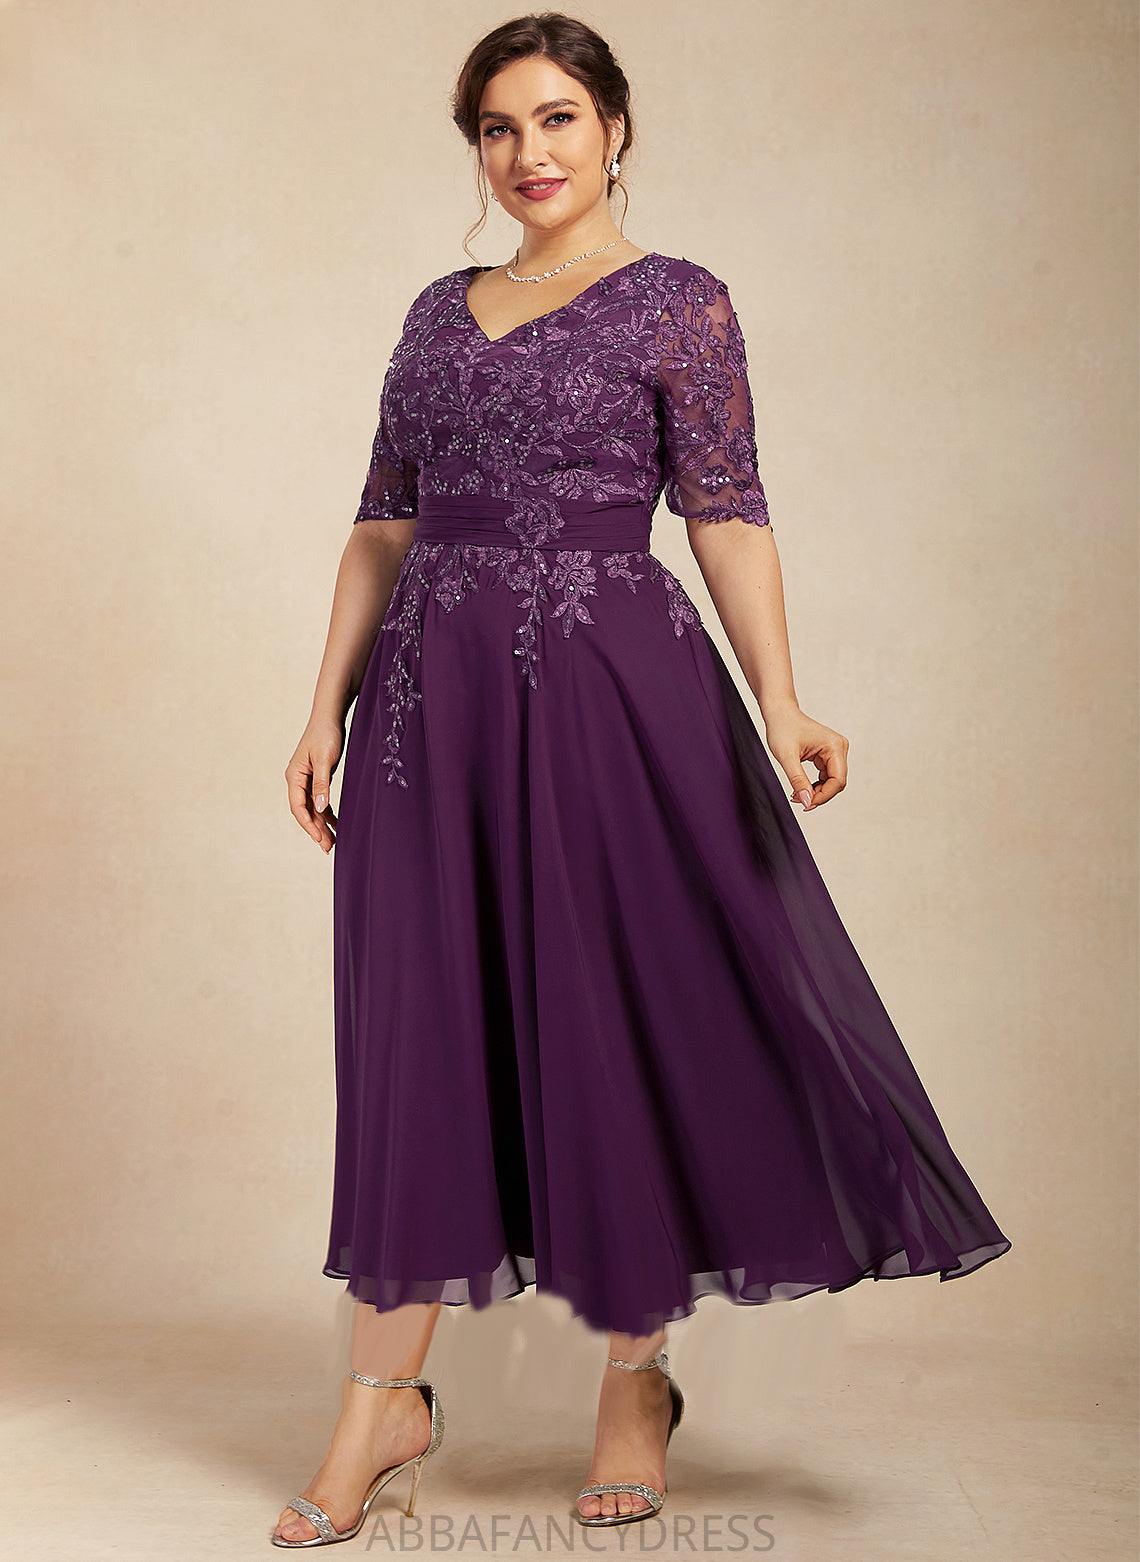 Tea-Length Mother With V-neck A-Line Dress Sequins of Chiffon Aleena Lace Mother of the Bride Dresses the Bride